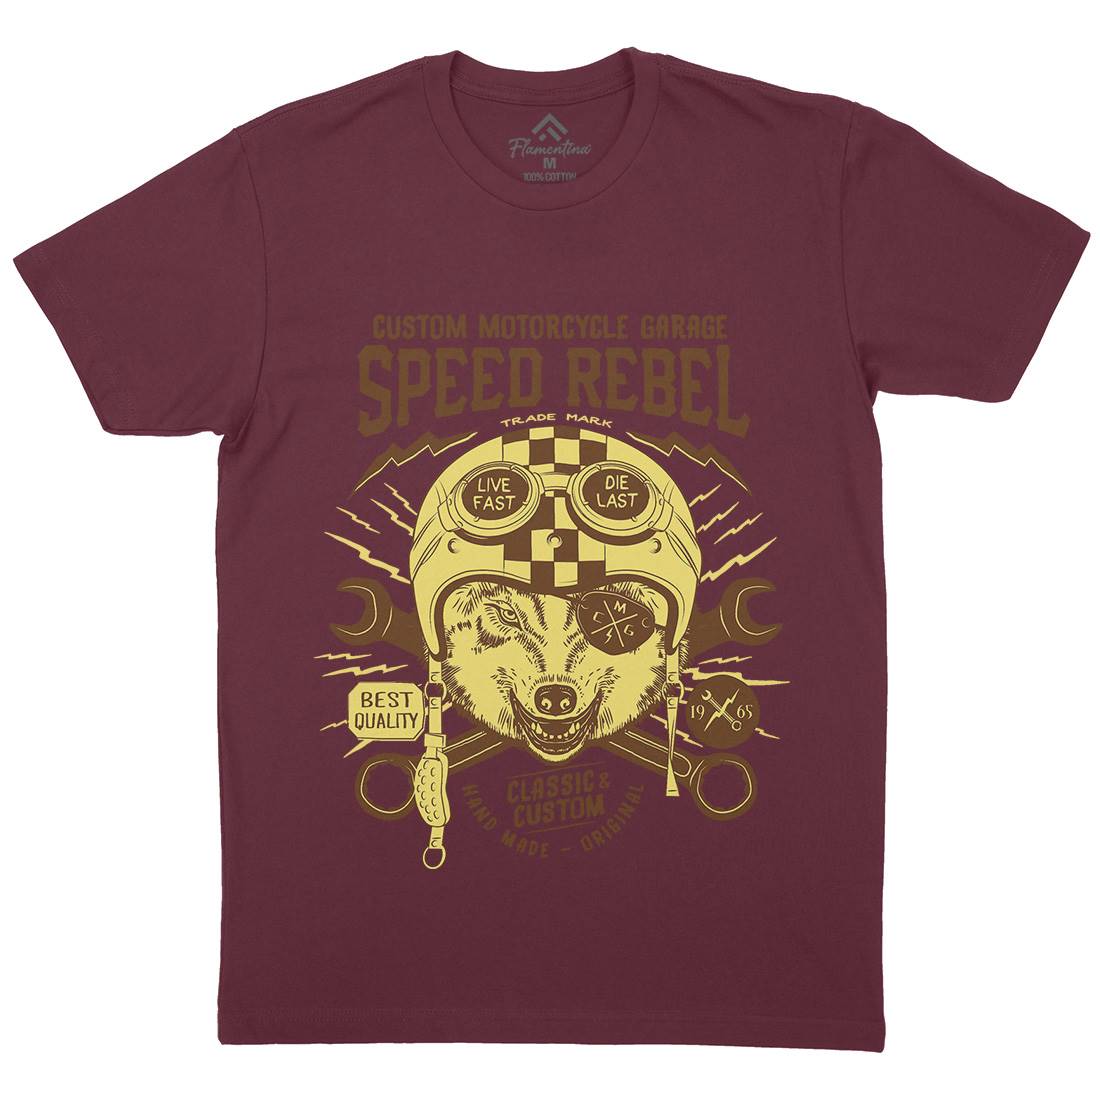 Speed Rebel Mens Crew Neck T-Shirt Motorcycles A998